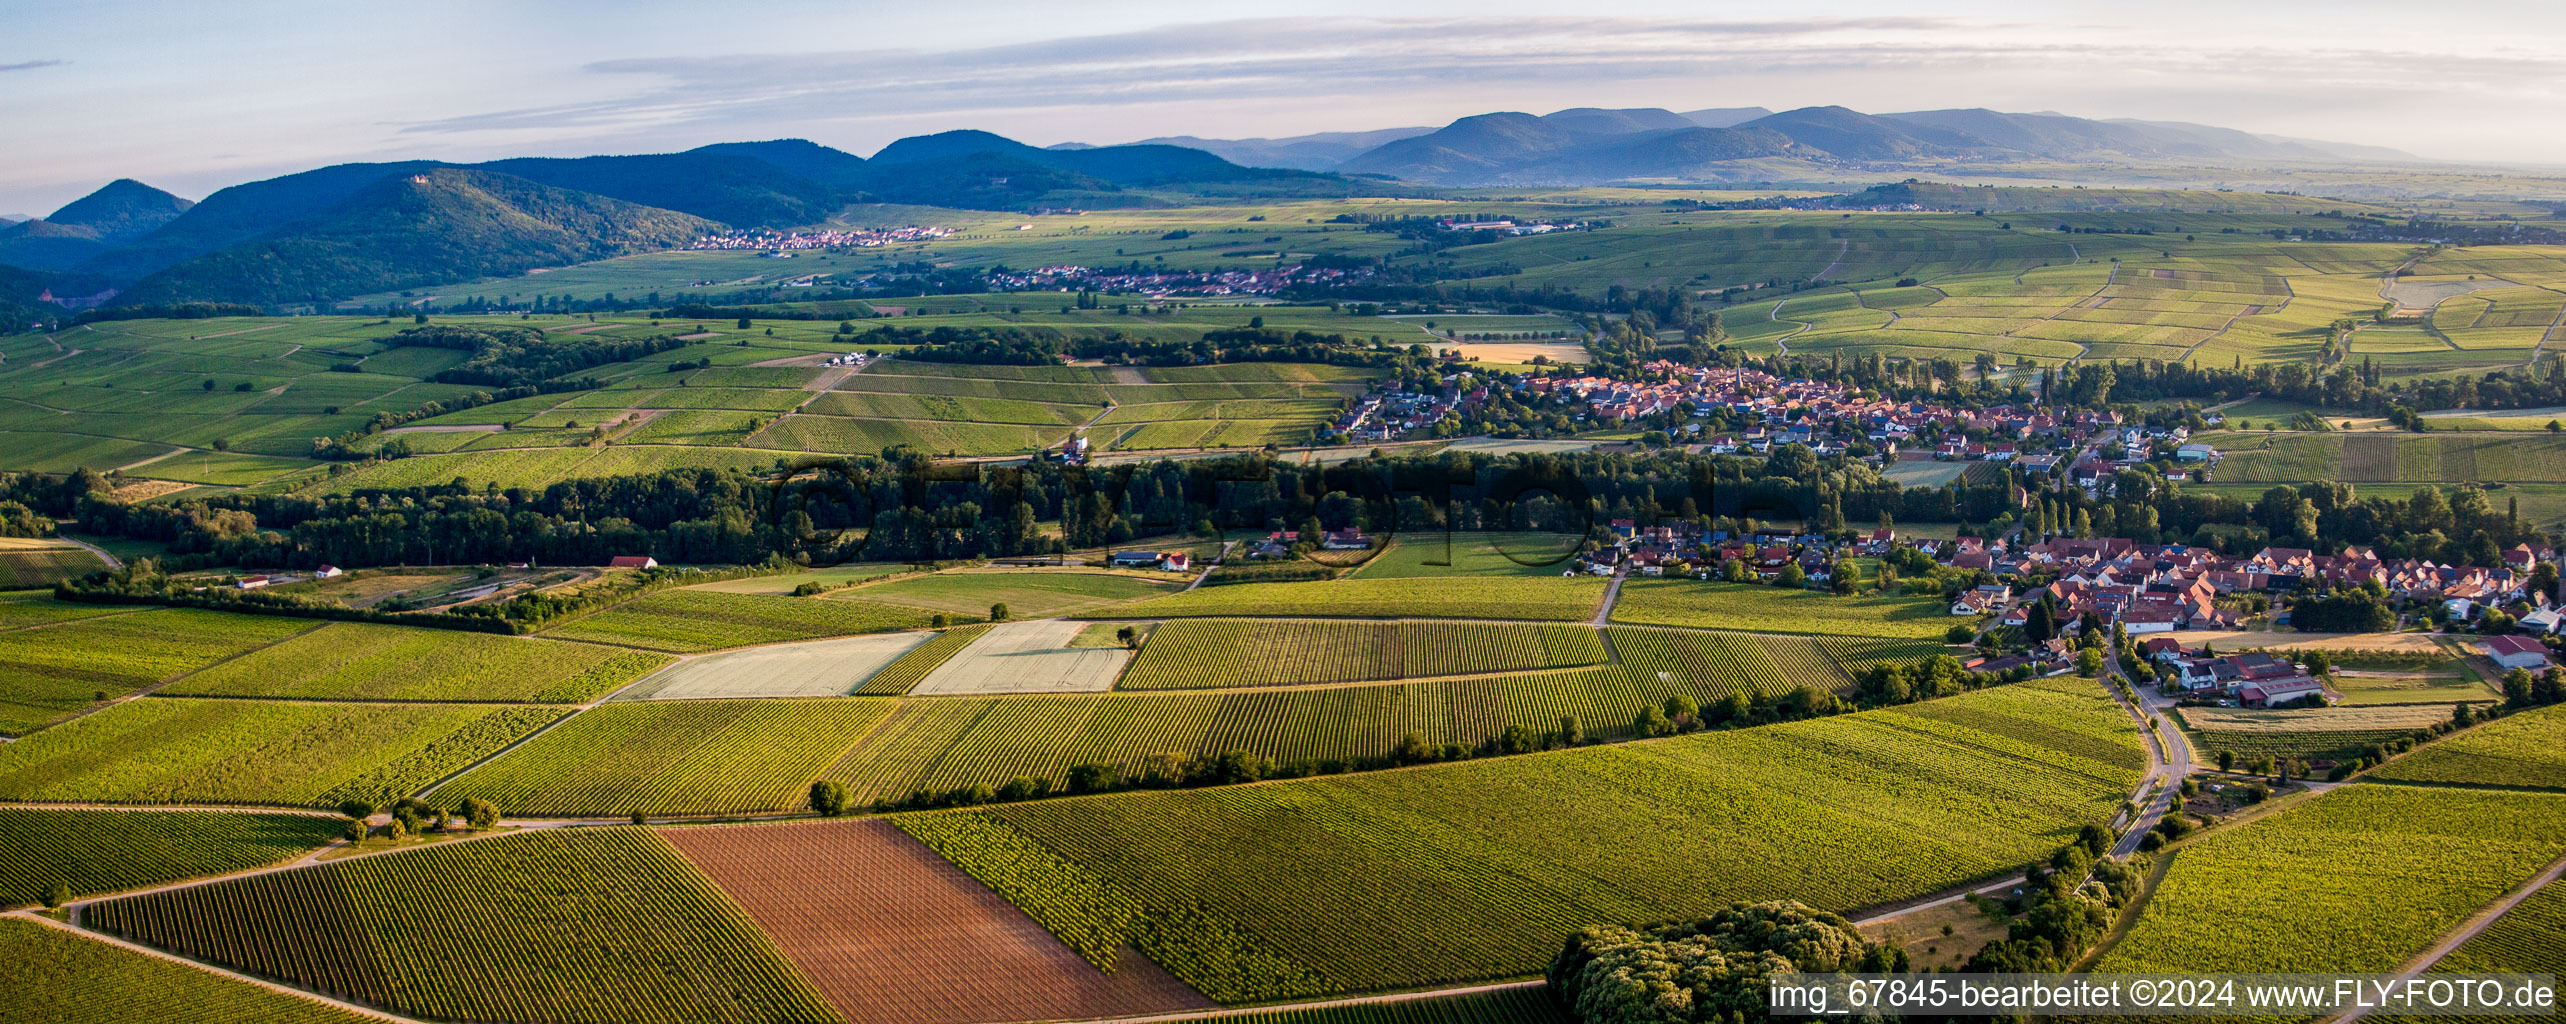 Panoramic perspective Village - view on the edge of agricultural fields and farmland in the district Klingen in Heuchelheim-Klingen in the state Rhineland-Palatinate, Germany